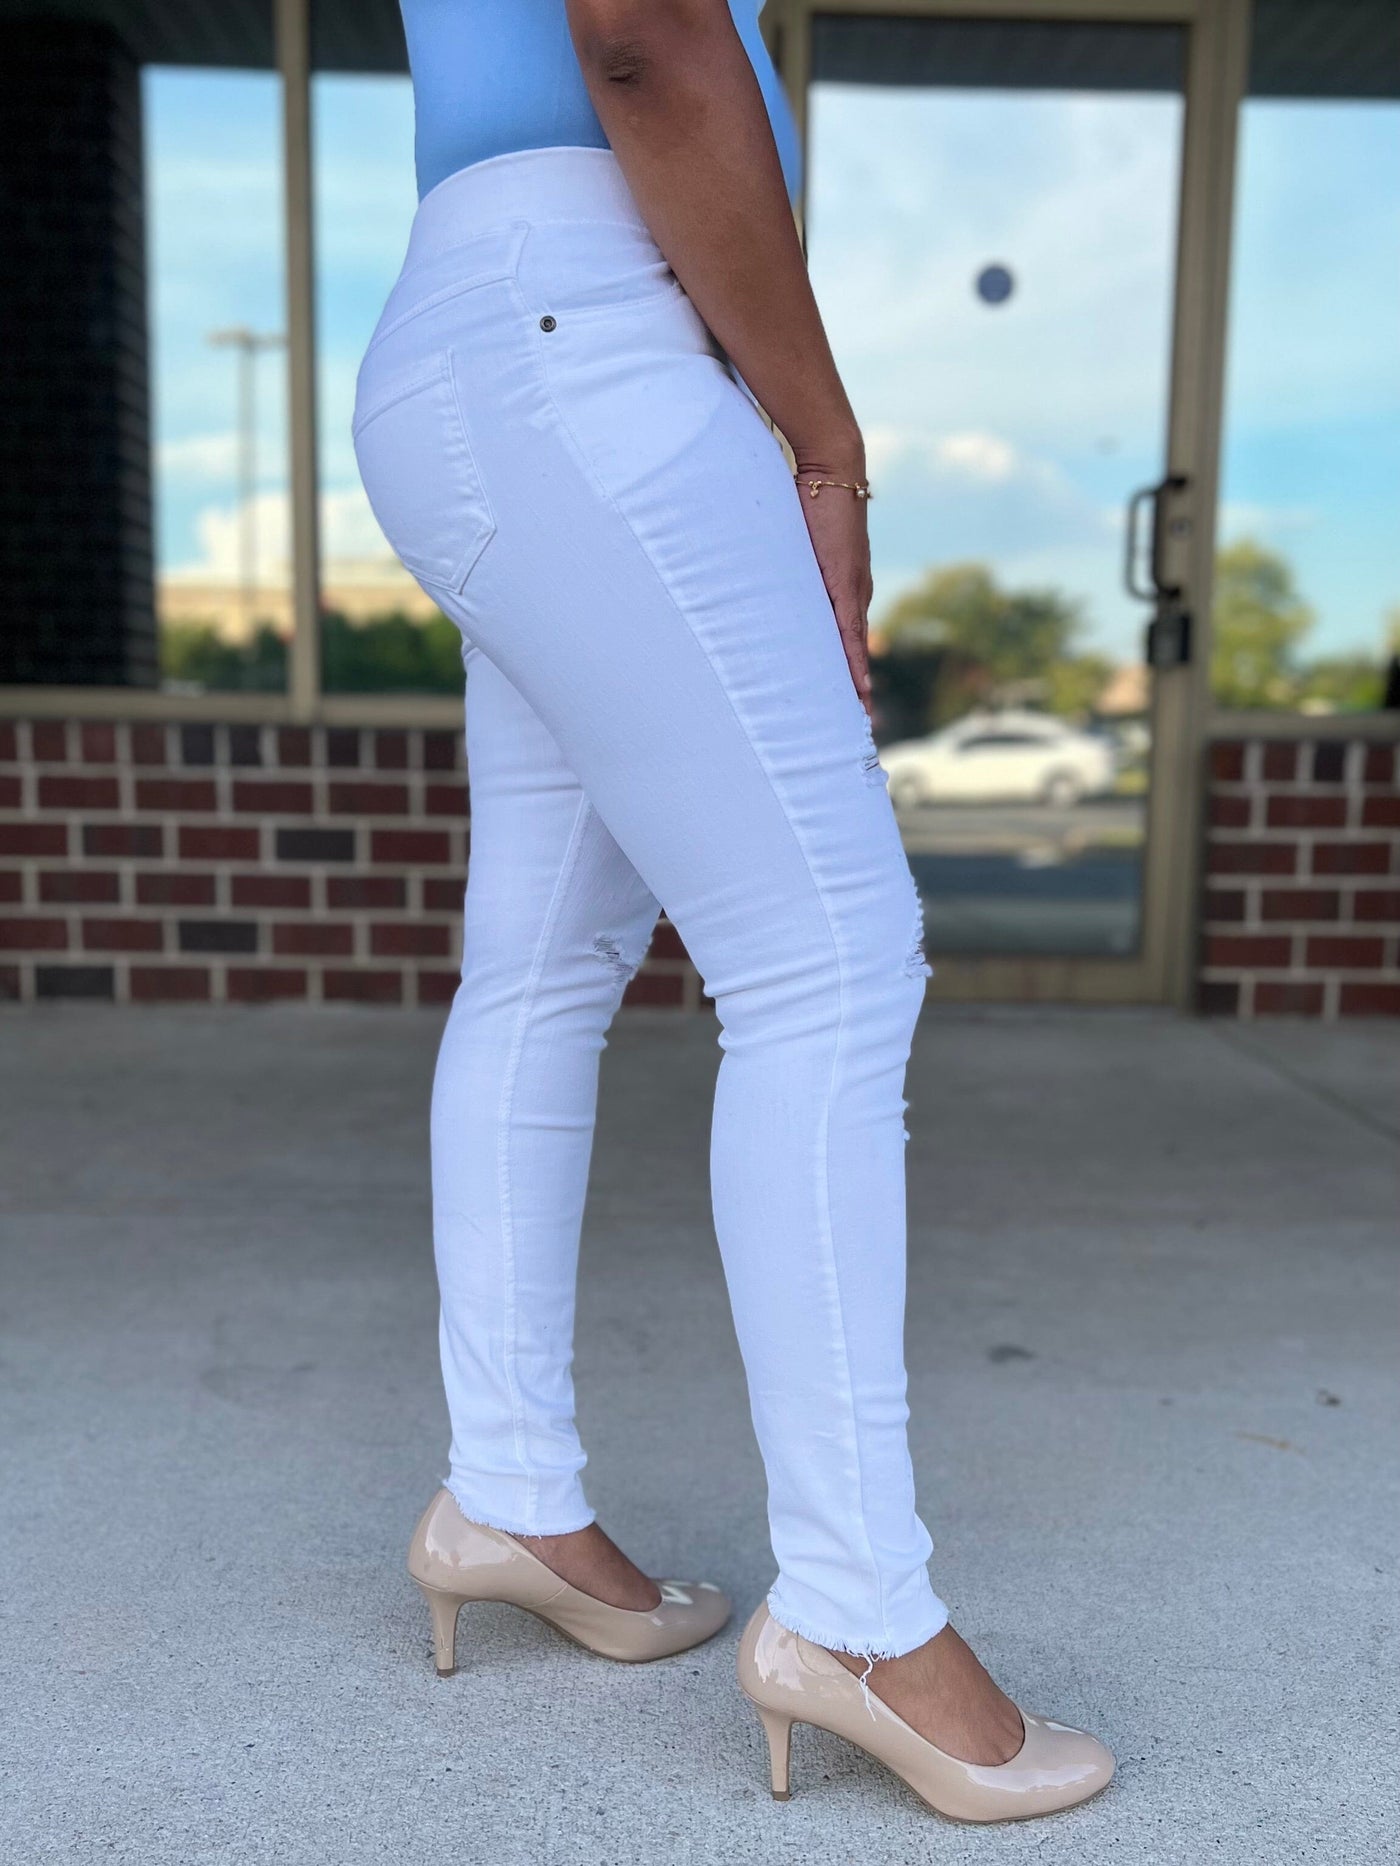 White Distressed Denim Jeggings Skinny Jeans Jeans Sybaritic Bags & Clothing 